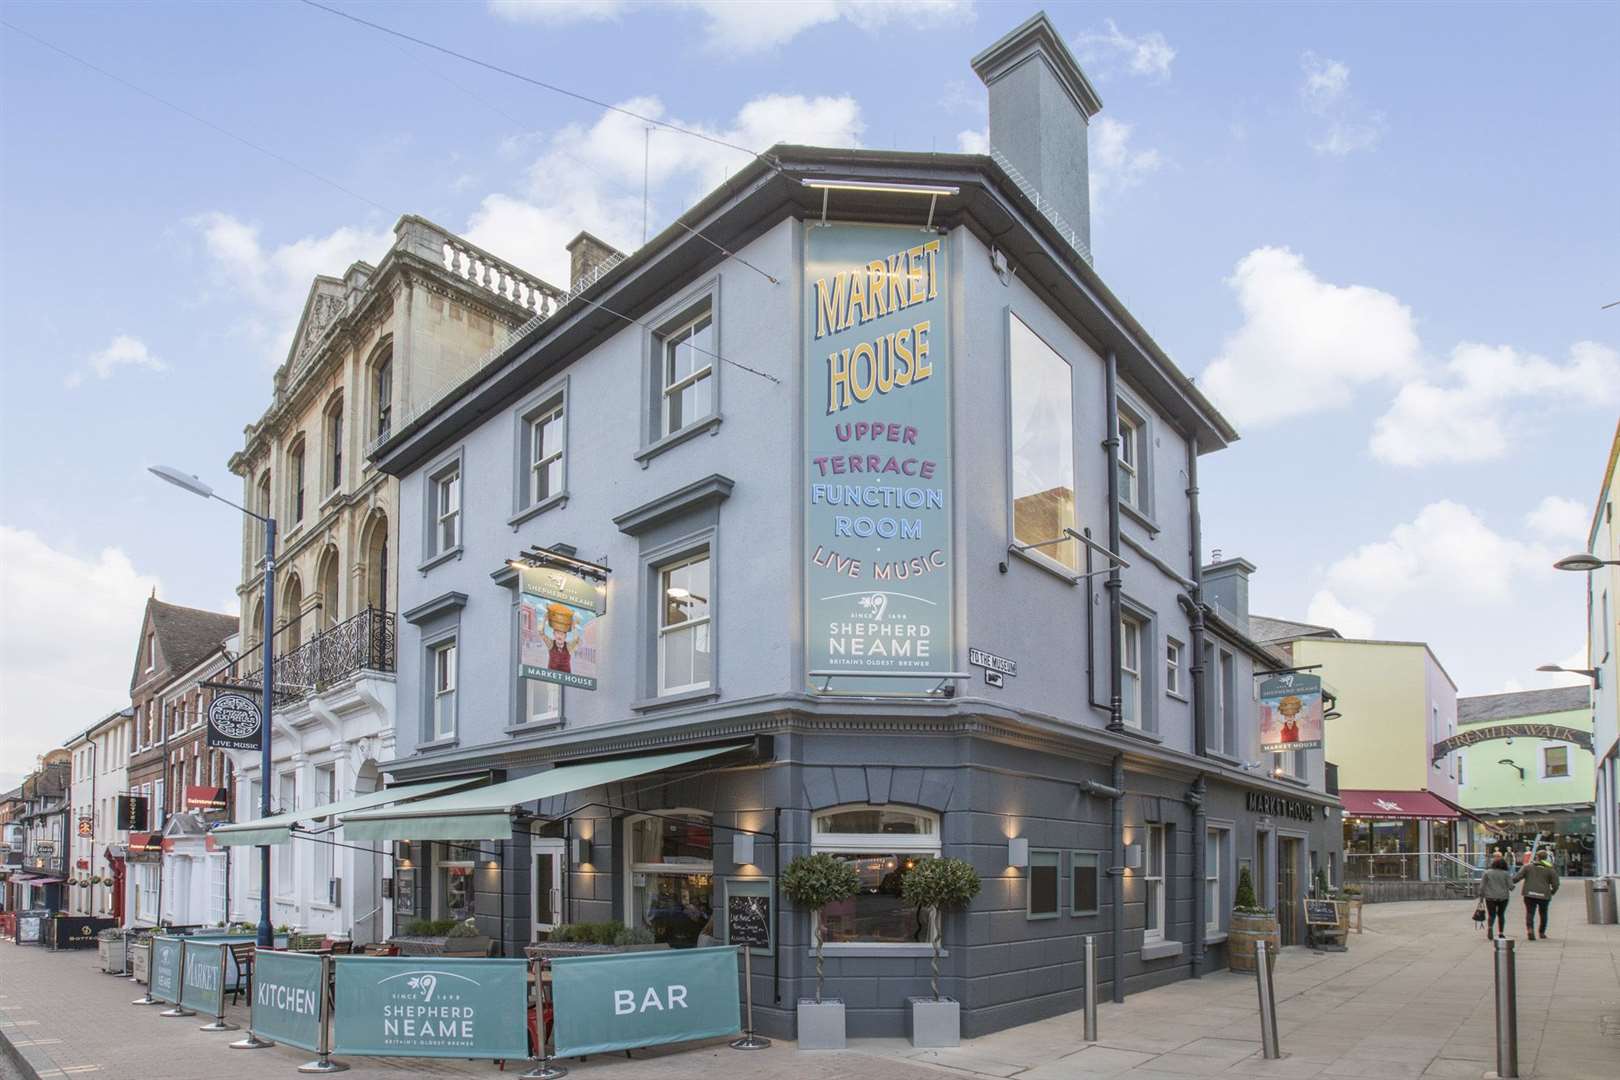 The Market House has won Pub of the Year at the Shepherd Neame Pub Awards (12715700)